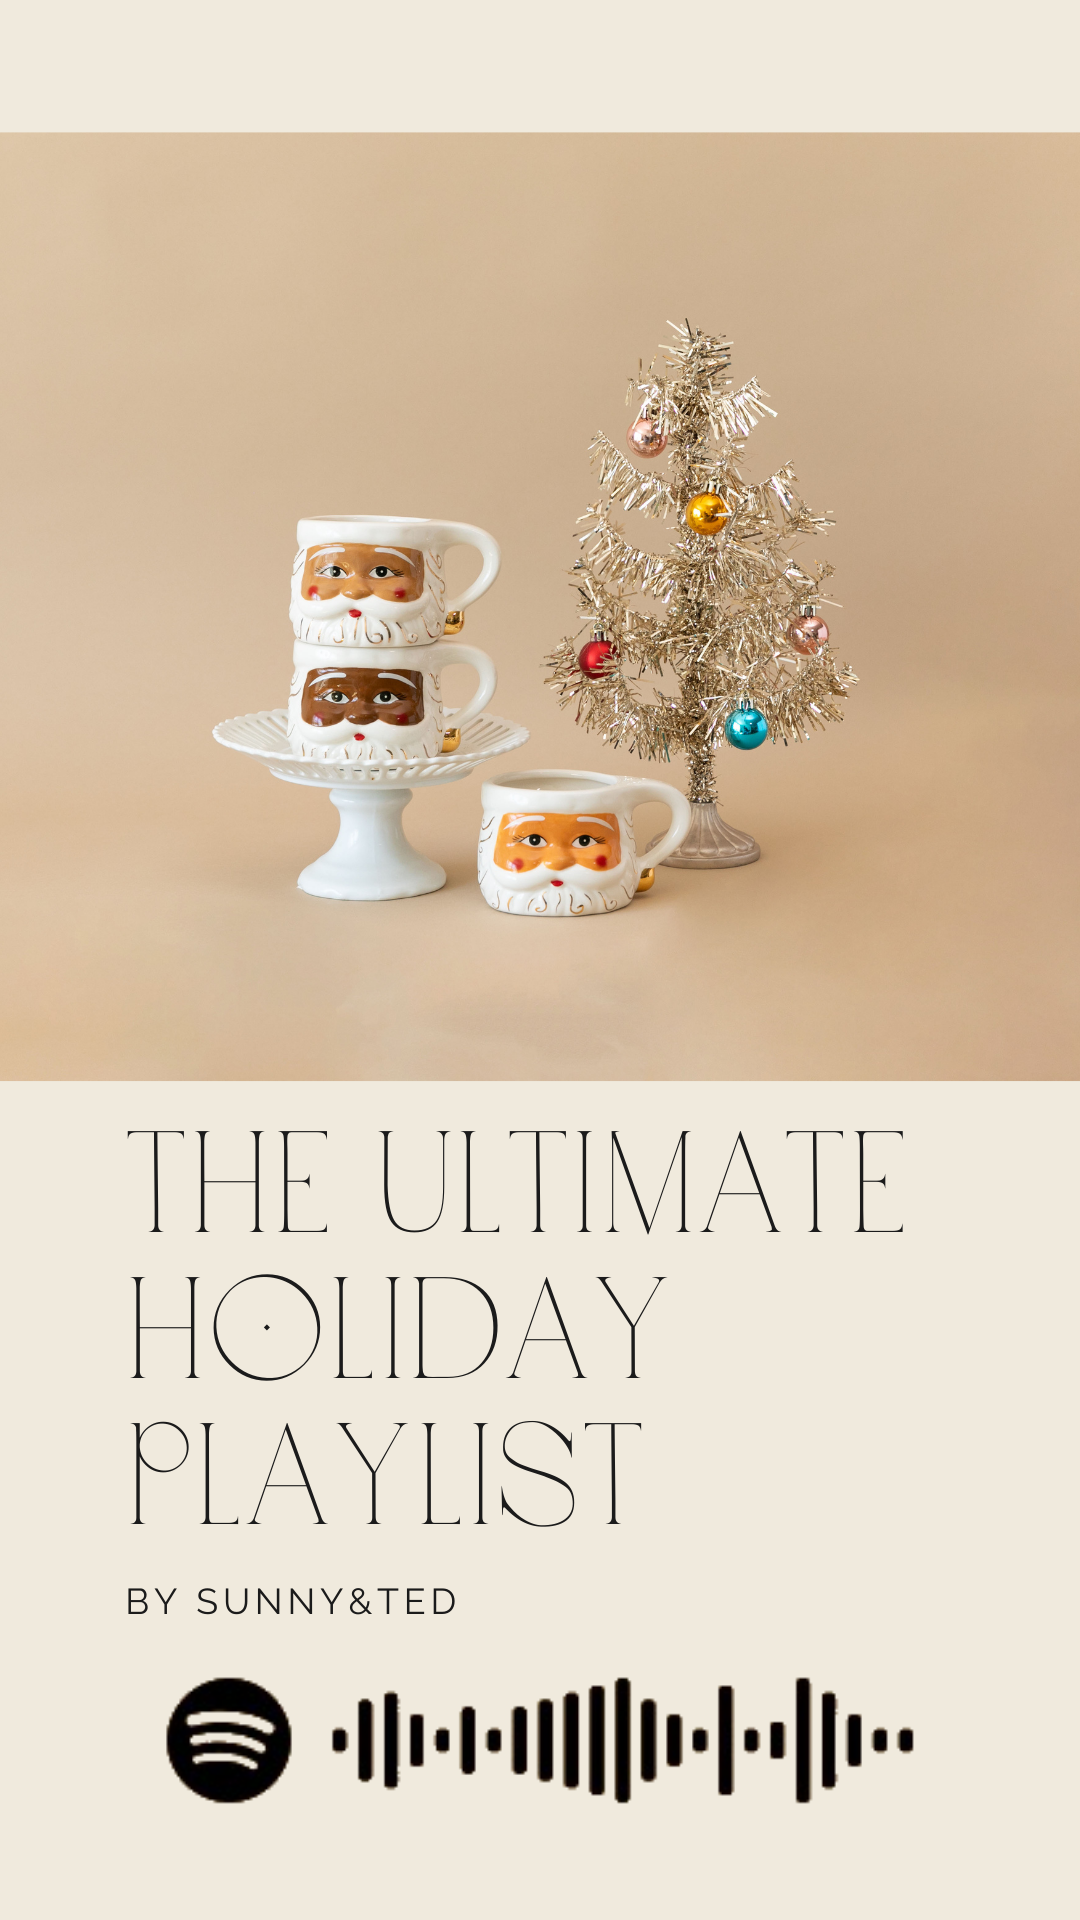 The Ultimate Holiday Playlist by SUNNY&TED